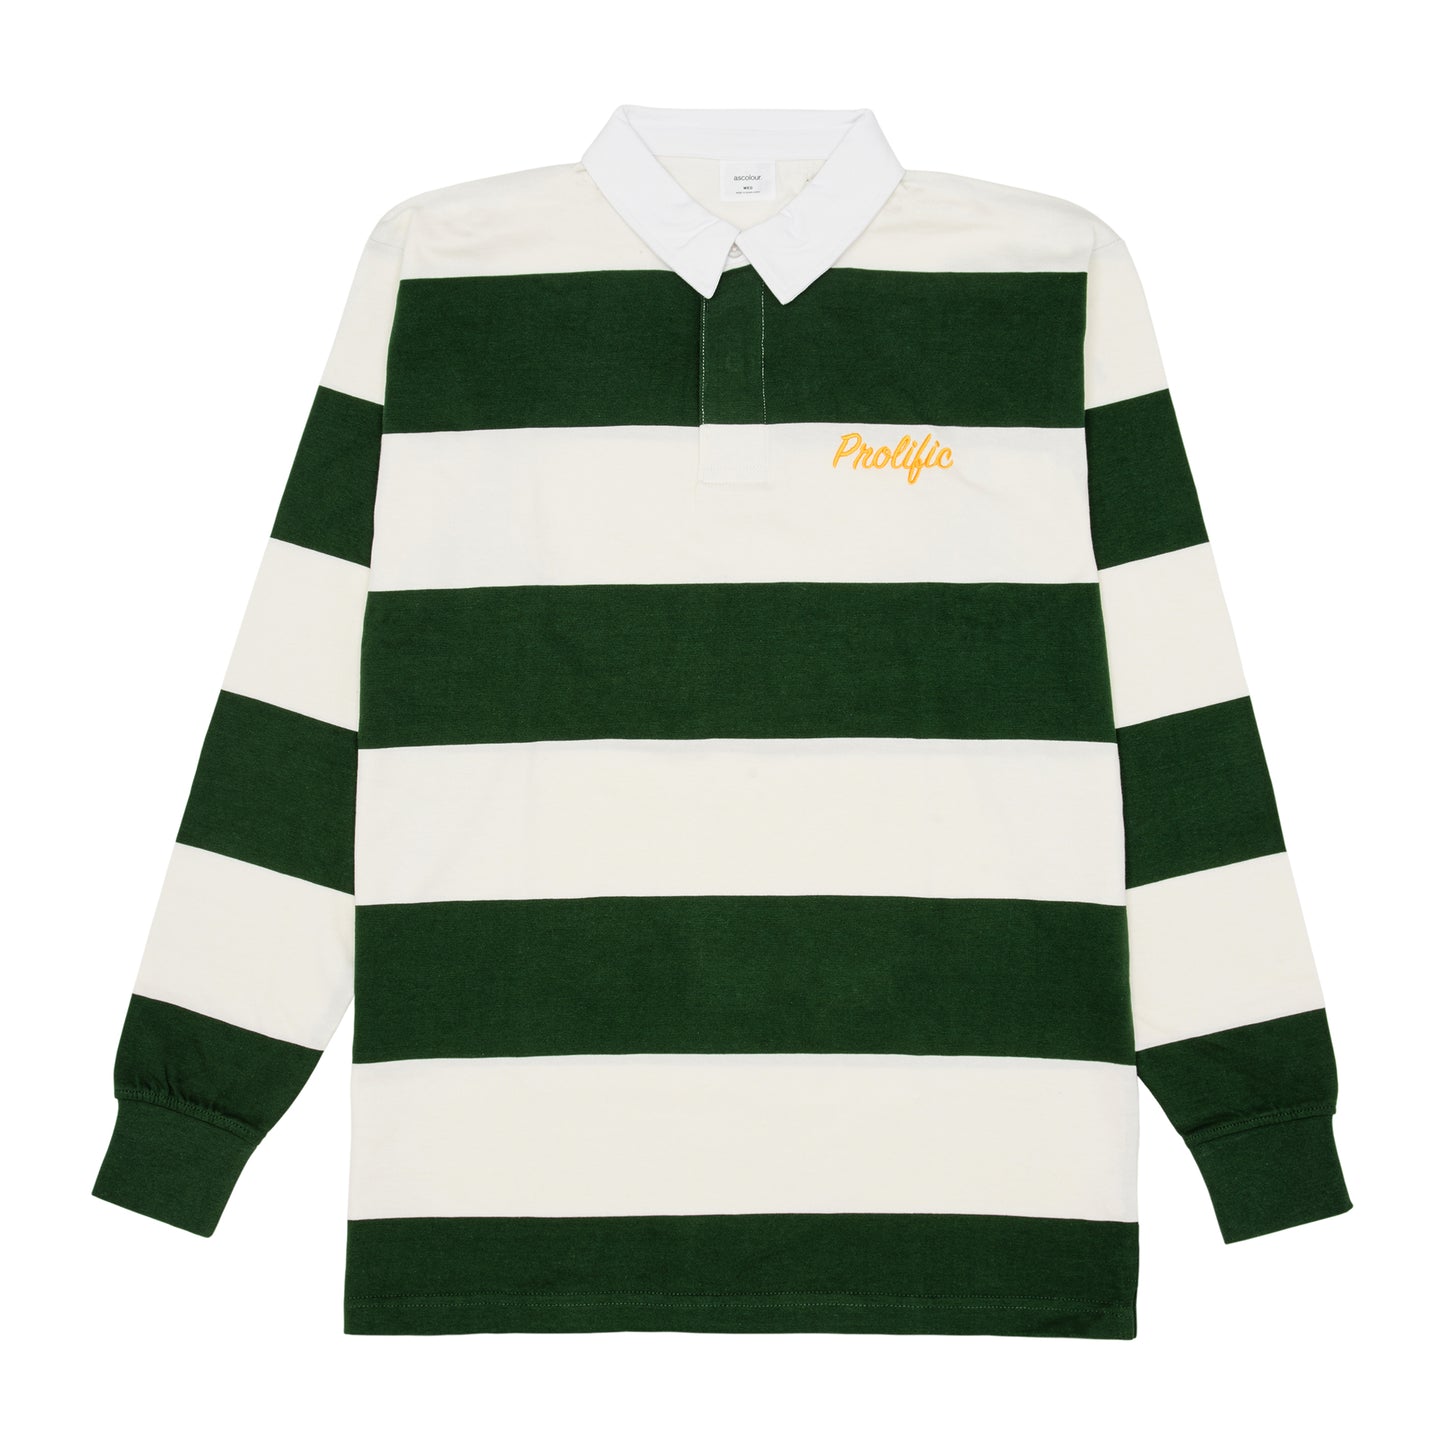 Prolific Rugby Jersey - White/Forest Green